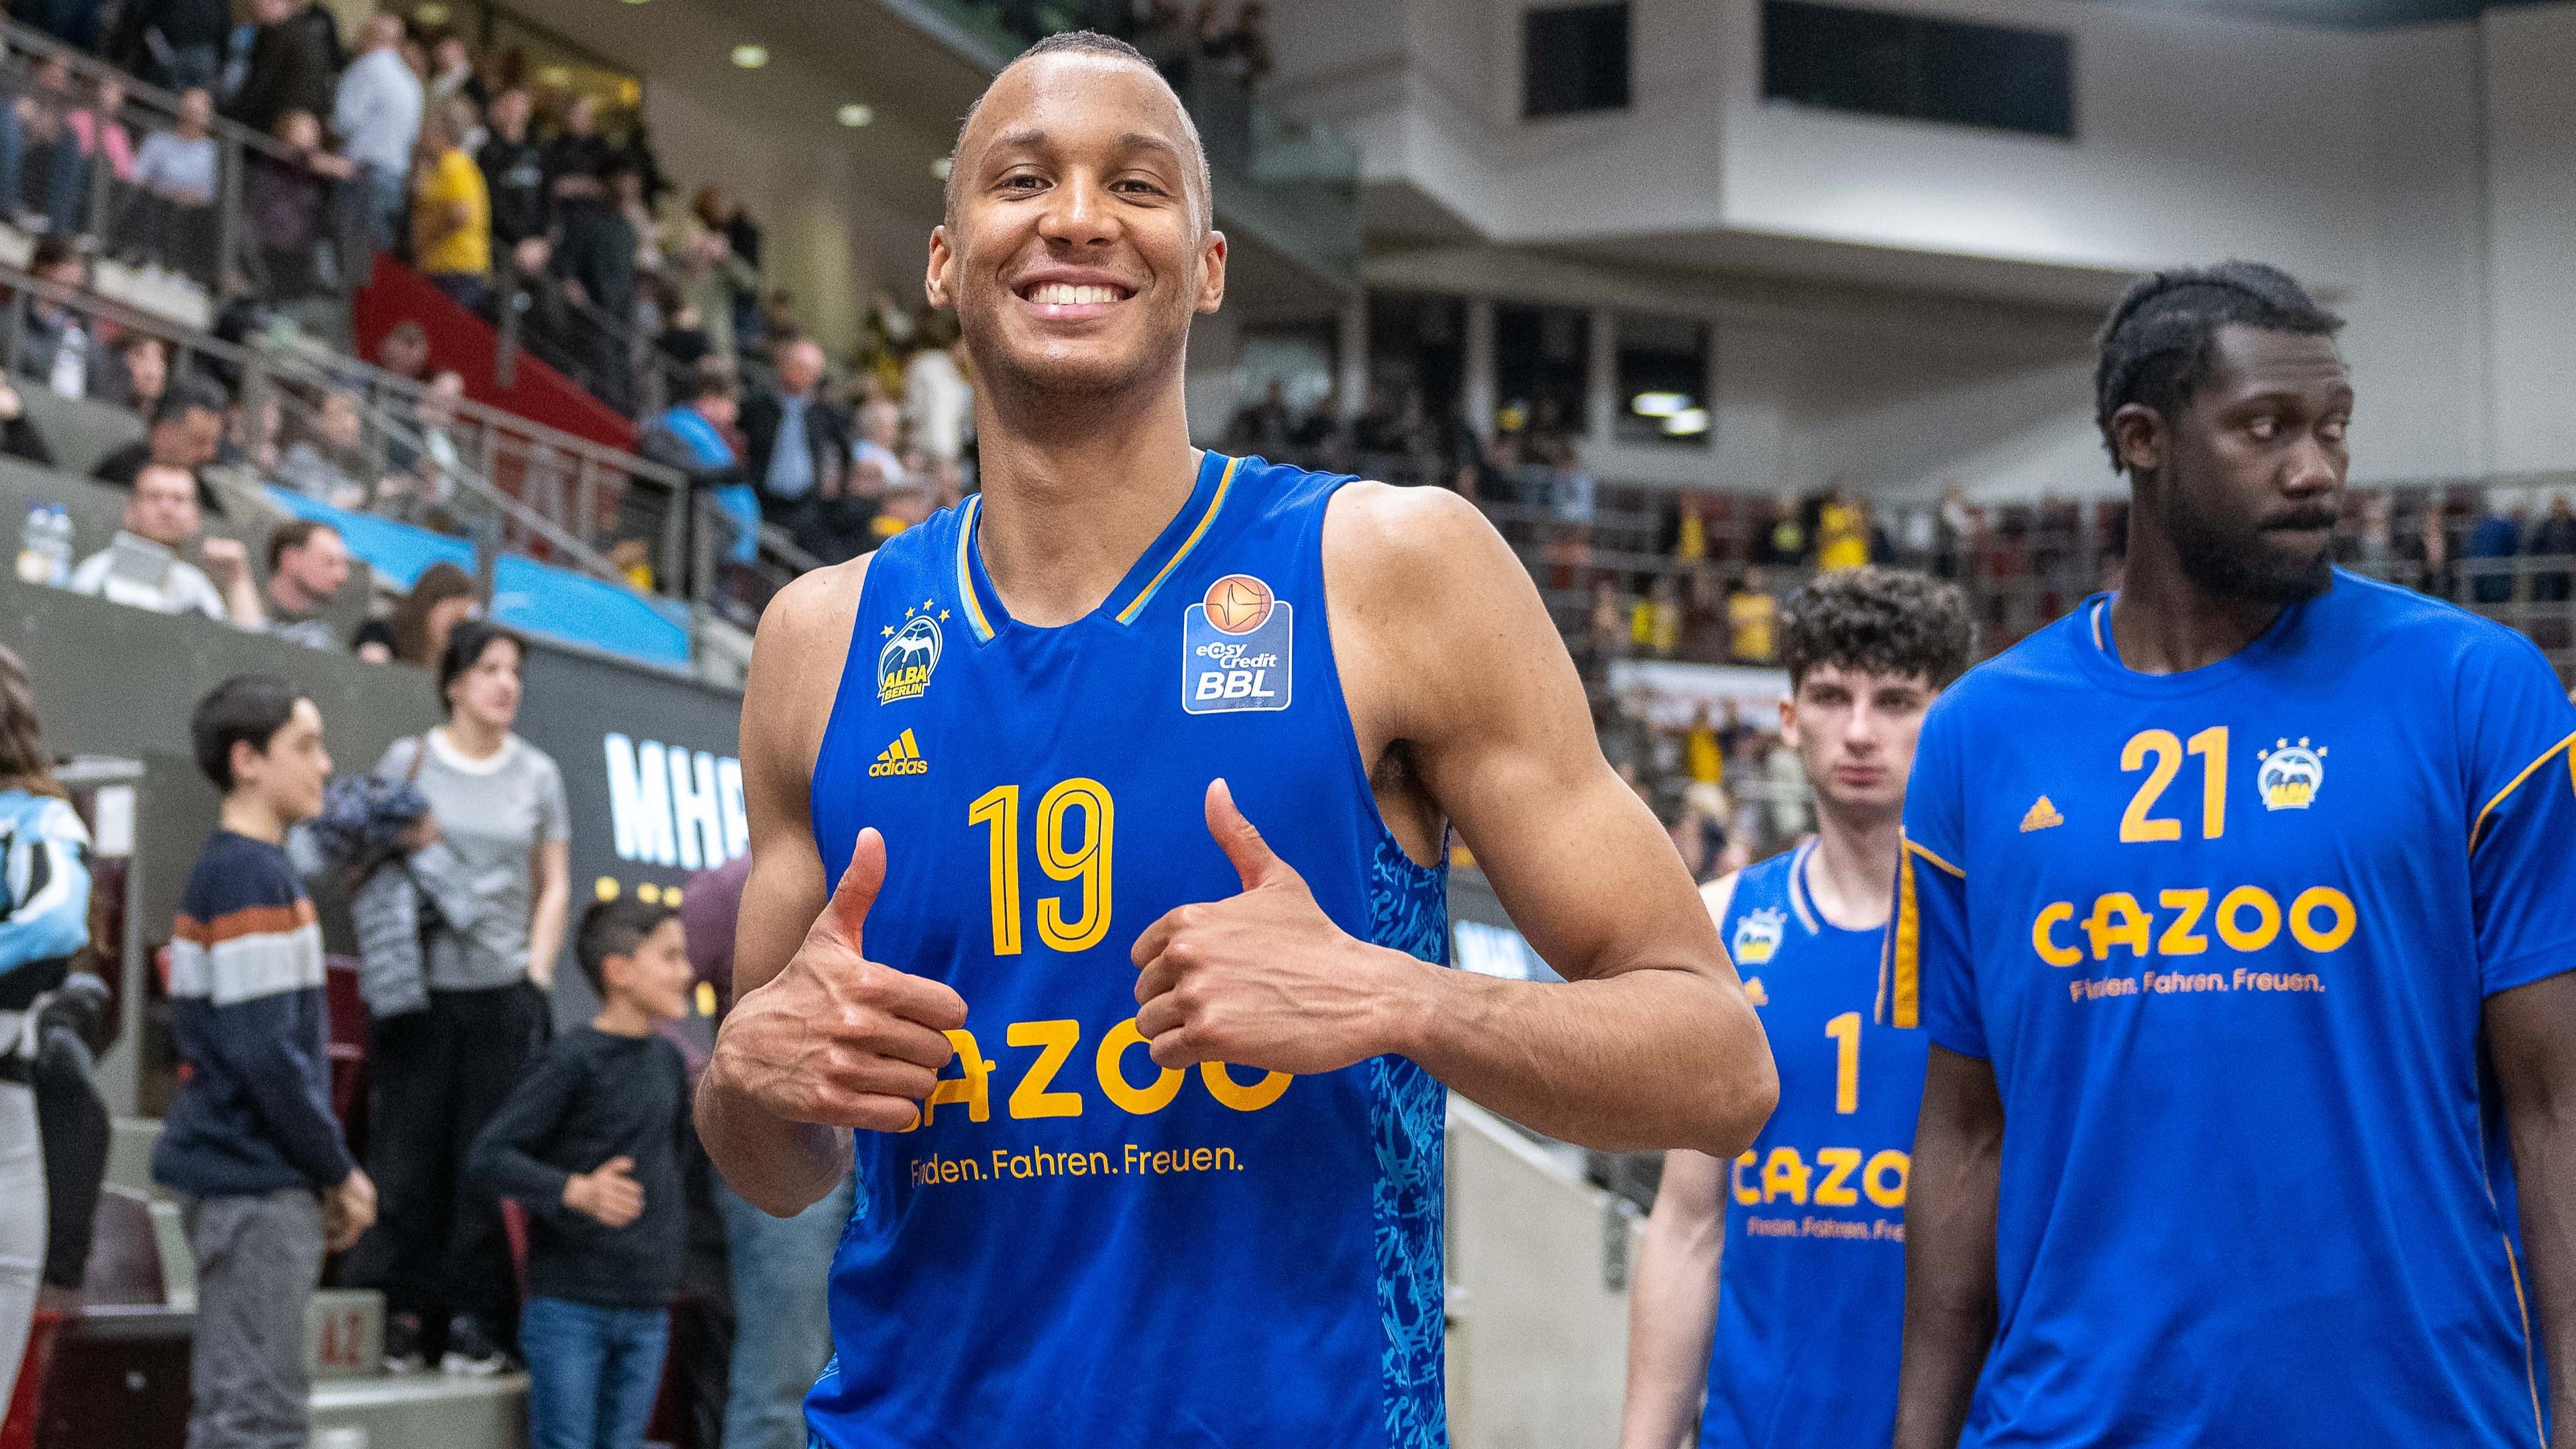 ALBA BERLIN and Telekom Baskets Bonn became the first two teams to lock up spots in the 2022-23 playoffs with hard-fought victories. Wins had been hard to come by for medi bayreuth, who finally celebrated again to snap an 11-game losing streak with a sign of life. Till Pape for his part set career highs in points and rebounds as BG Göttingen look to challenge for home court advantage. 